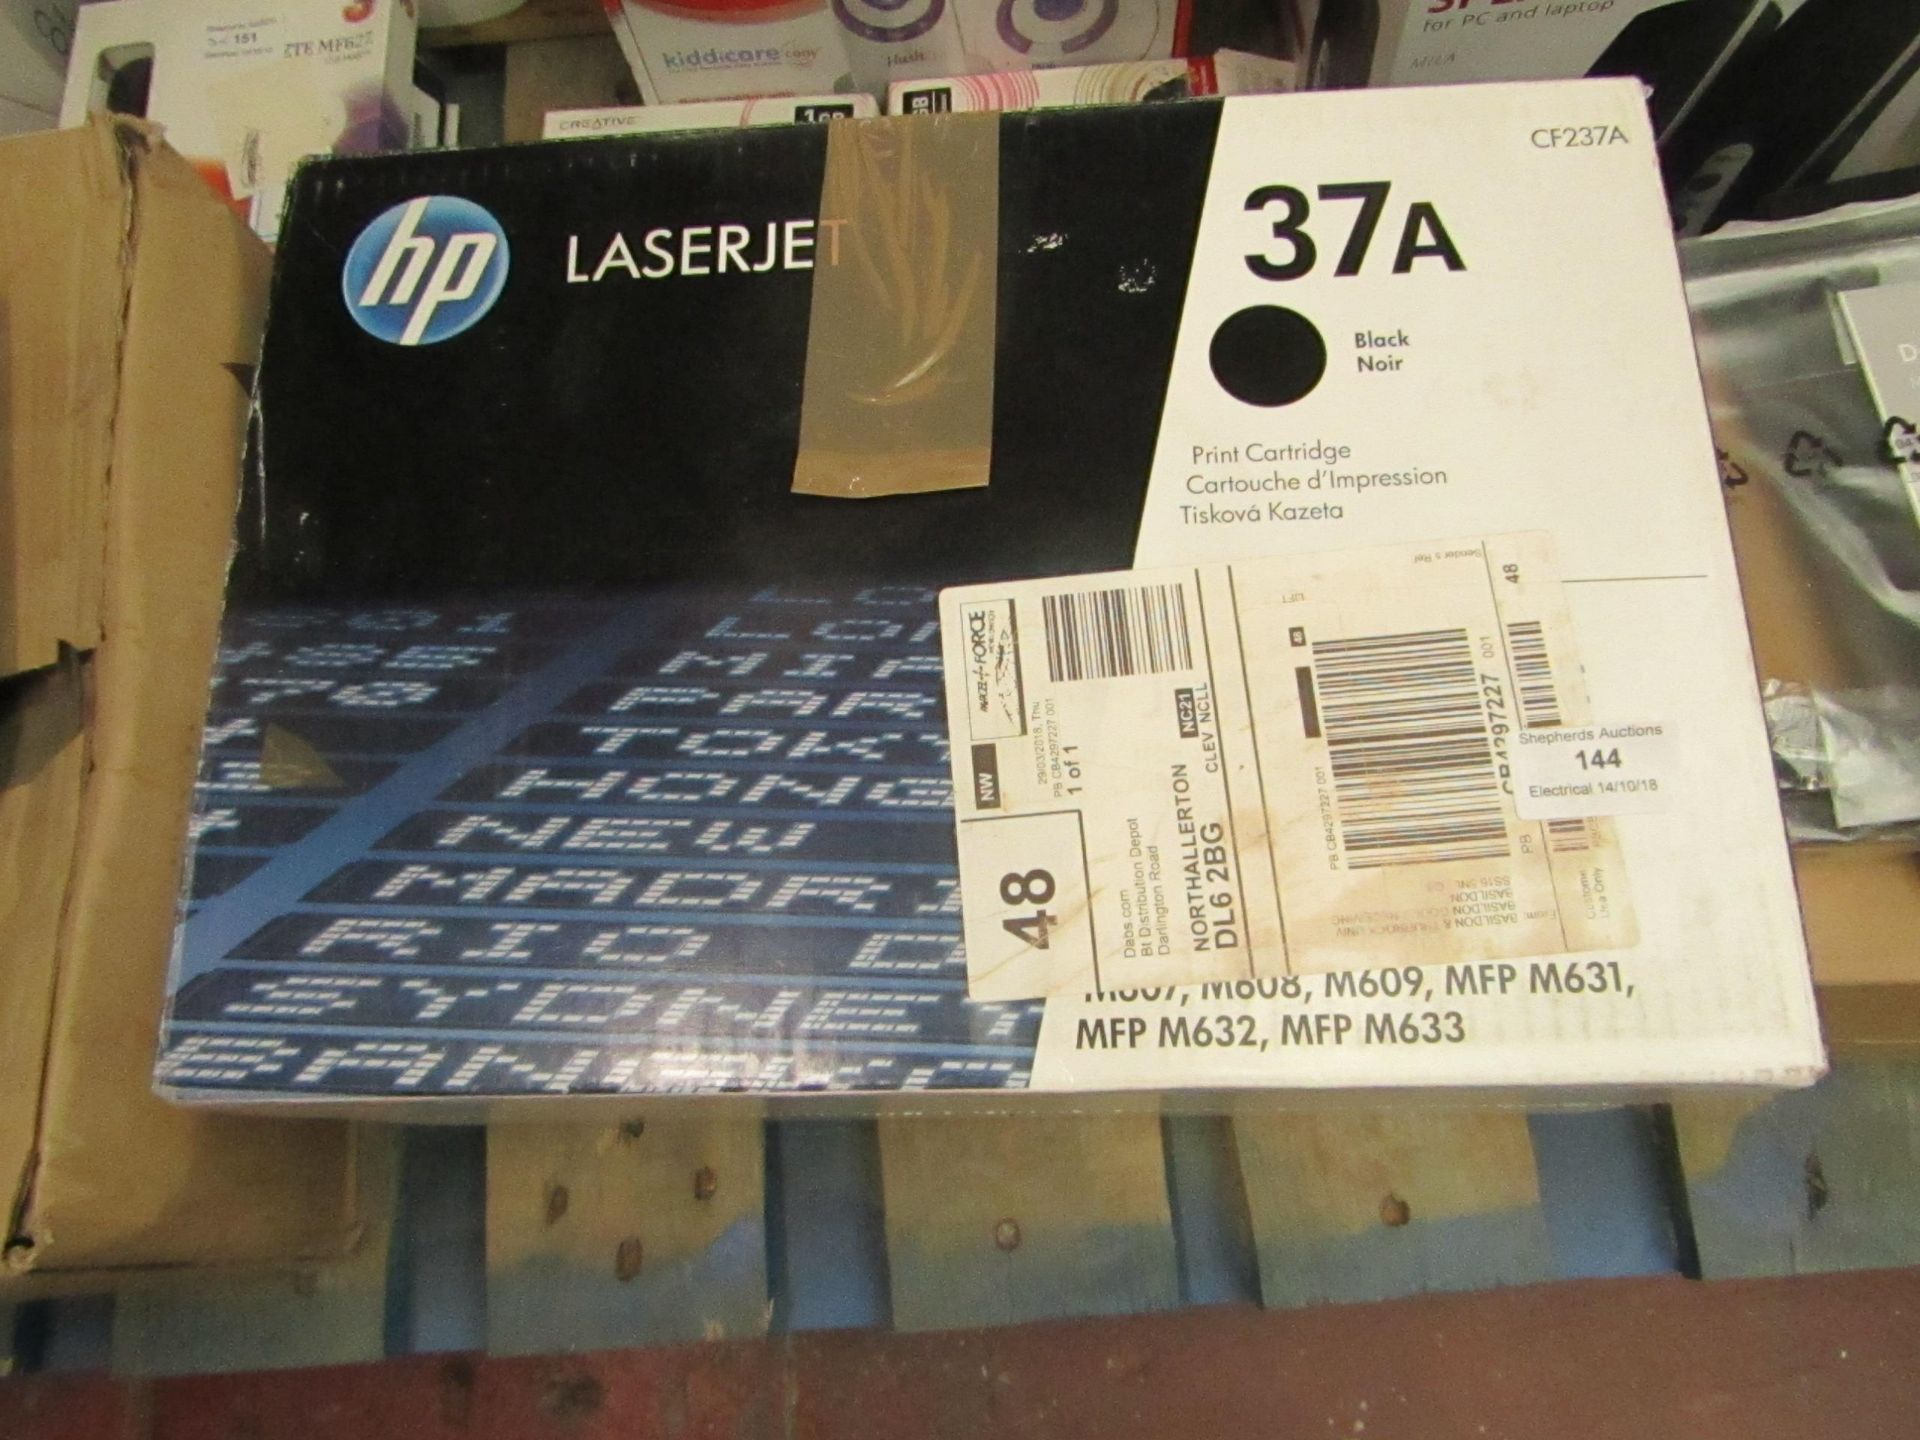 HP Laser Jet 37A Black print cartridge, boxed and unchecked